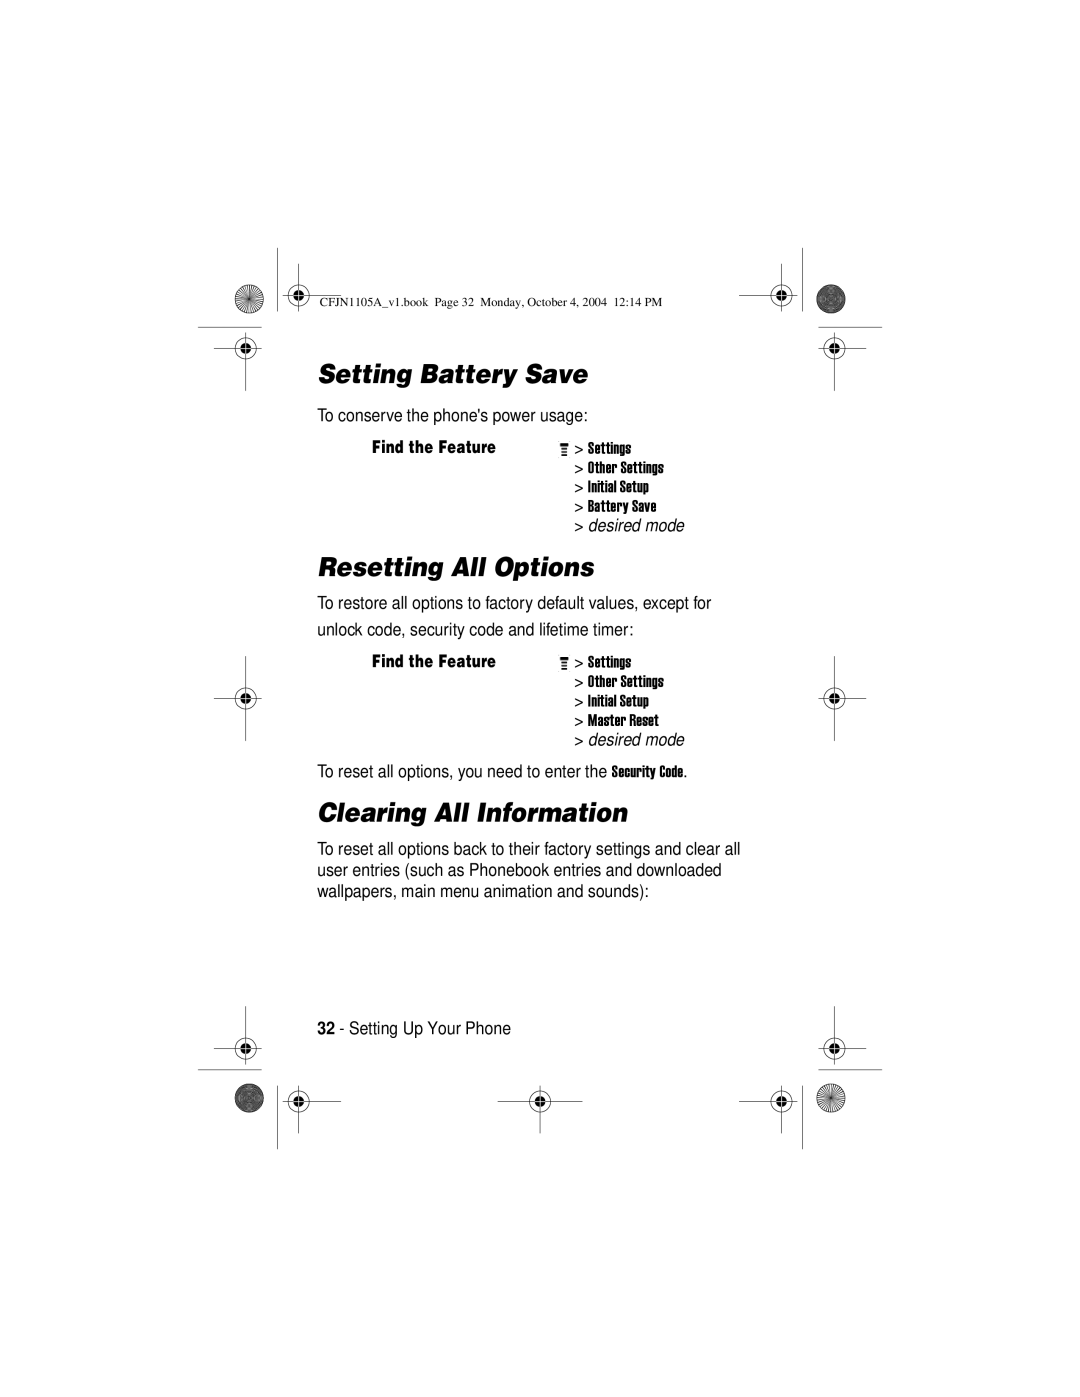 Motorola C156, C155 manual Setting Battery Save, Resetting All Options, Clearing All Information 